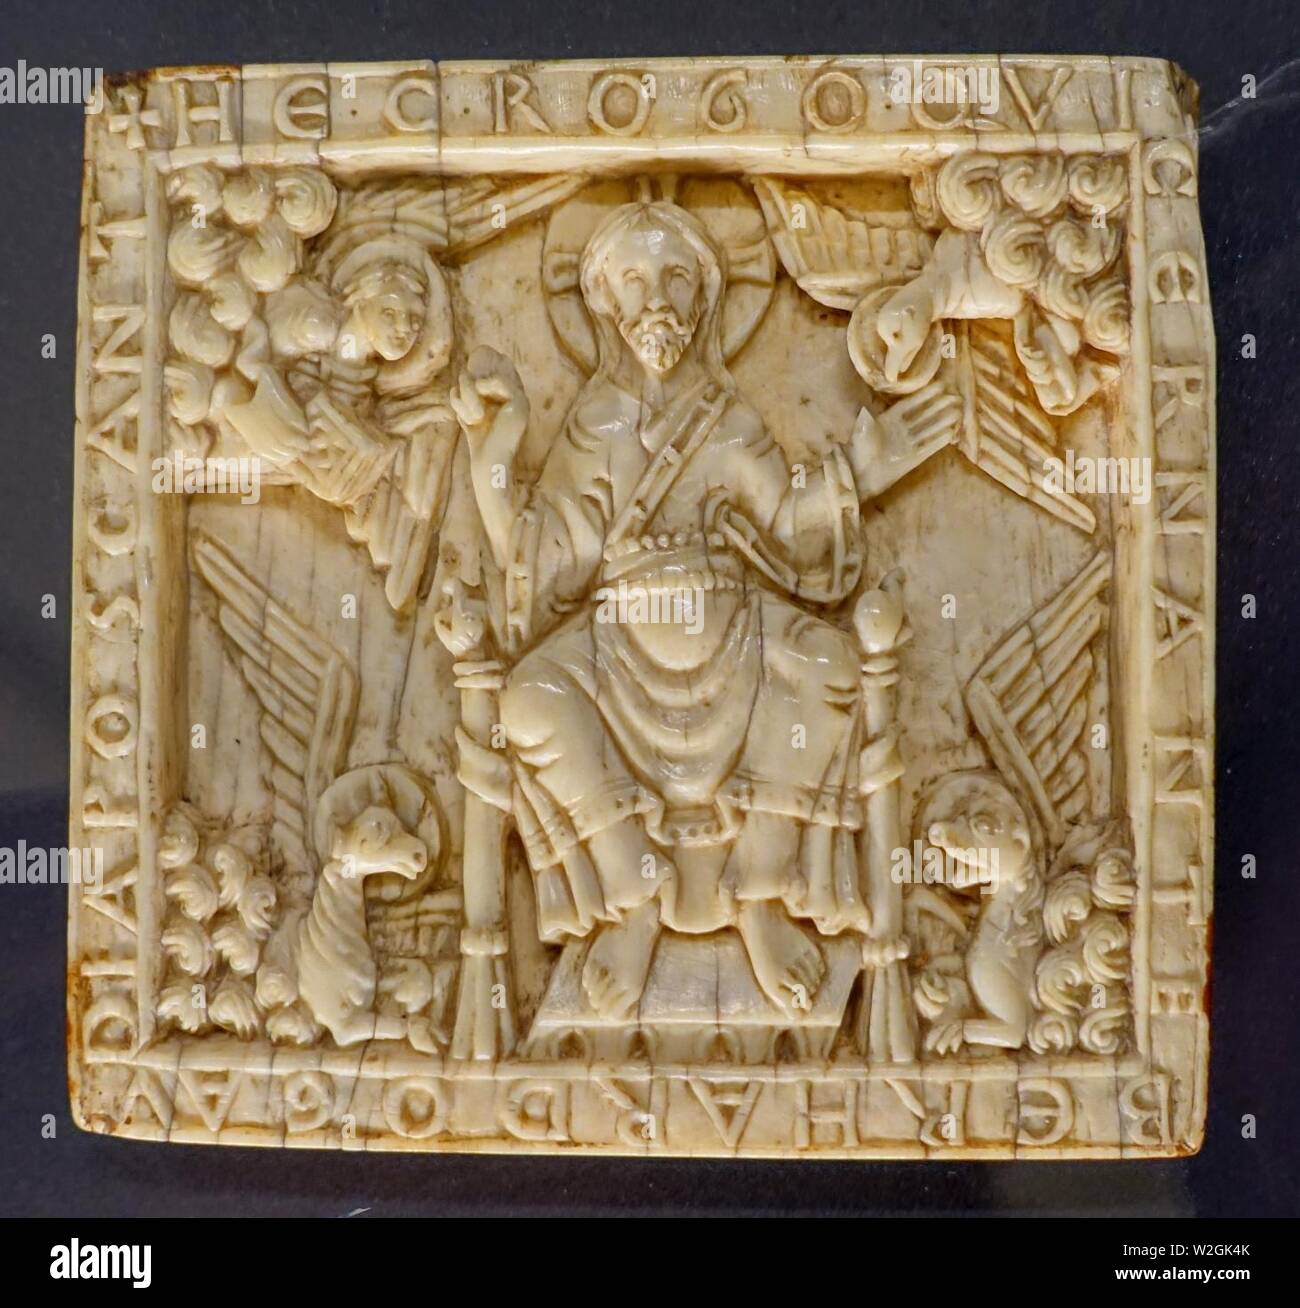 Christ in Majesty with the evangelist symbols, Trier or southwestern Germany, 1100-1150 AD, ivory - Hessisches Stock Photo